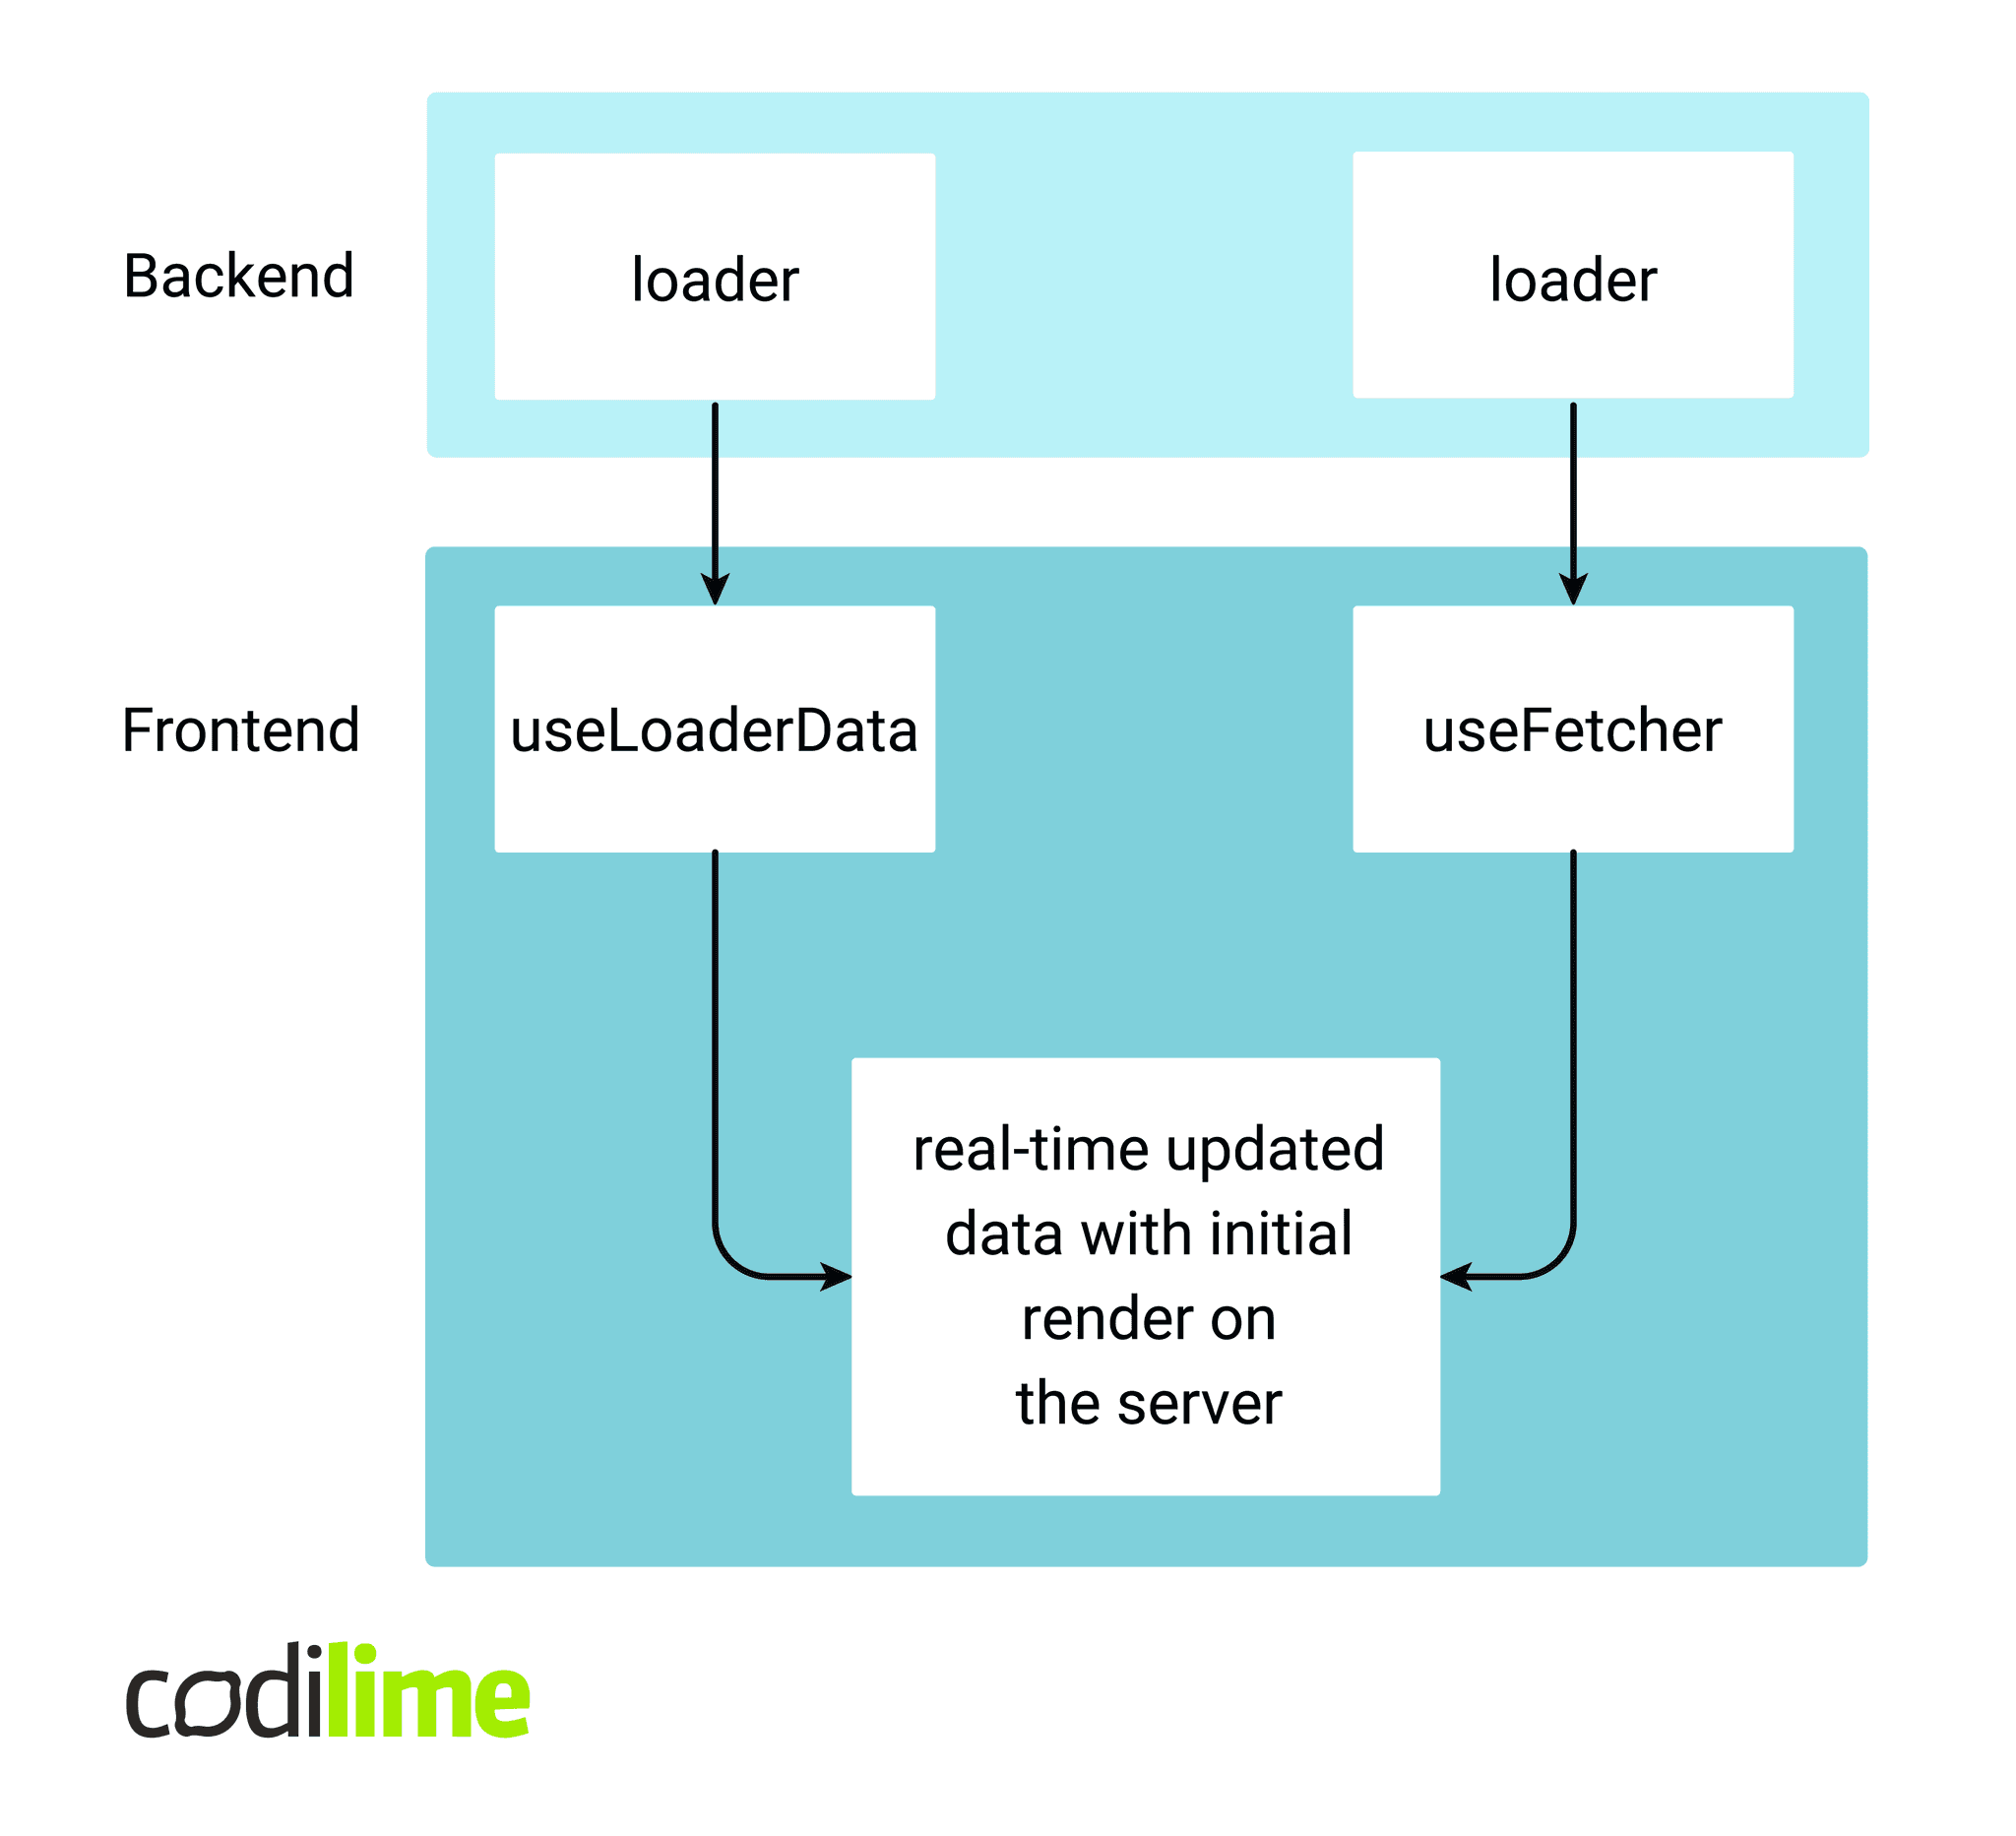 Real-time updated data with initial render on the server flow